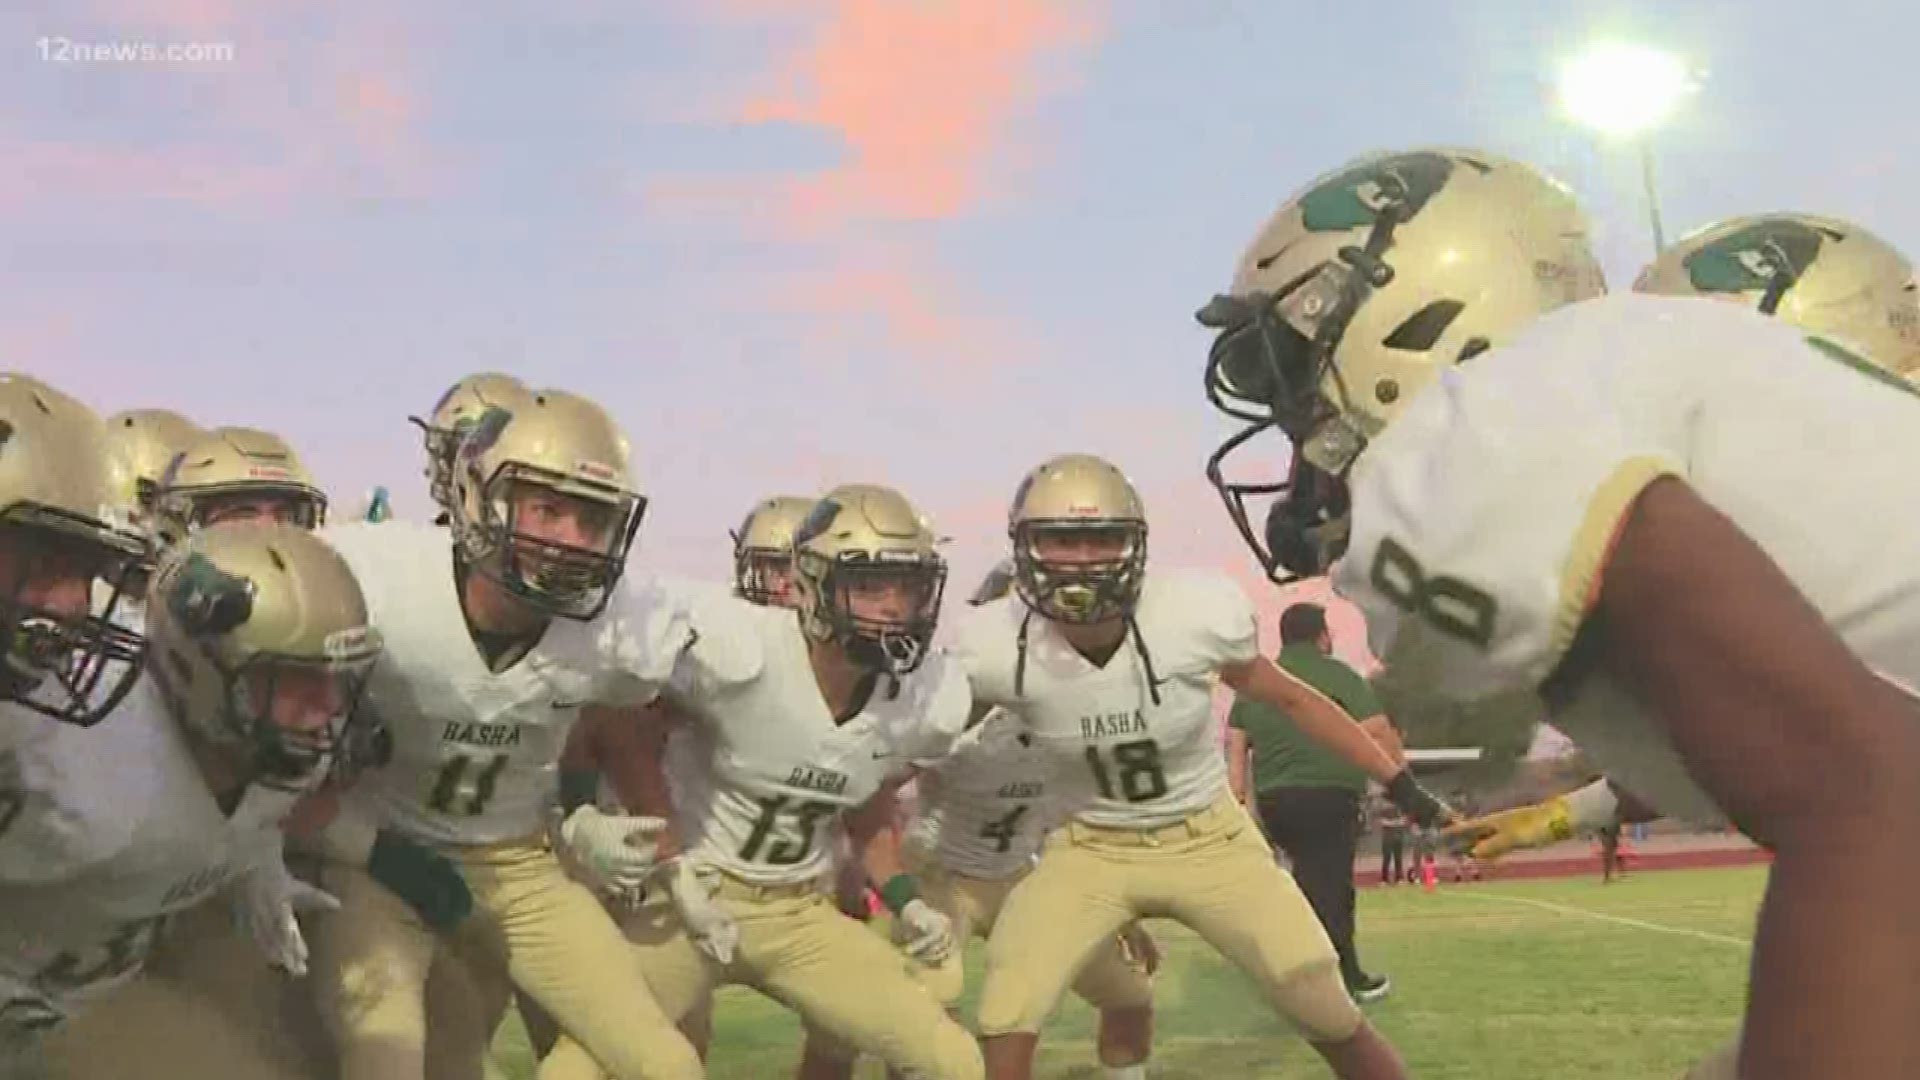 Our Week 1 Studio Team the Basha Bears join us on Friday Night Fever as we watch the highlights from their 48-20 win over Sandra Day O'Connor.